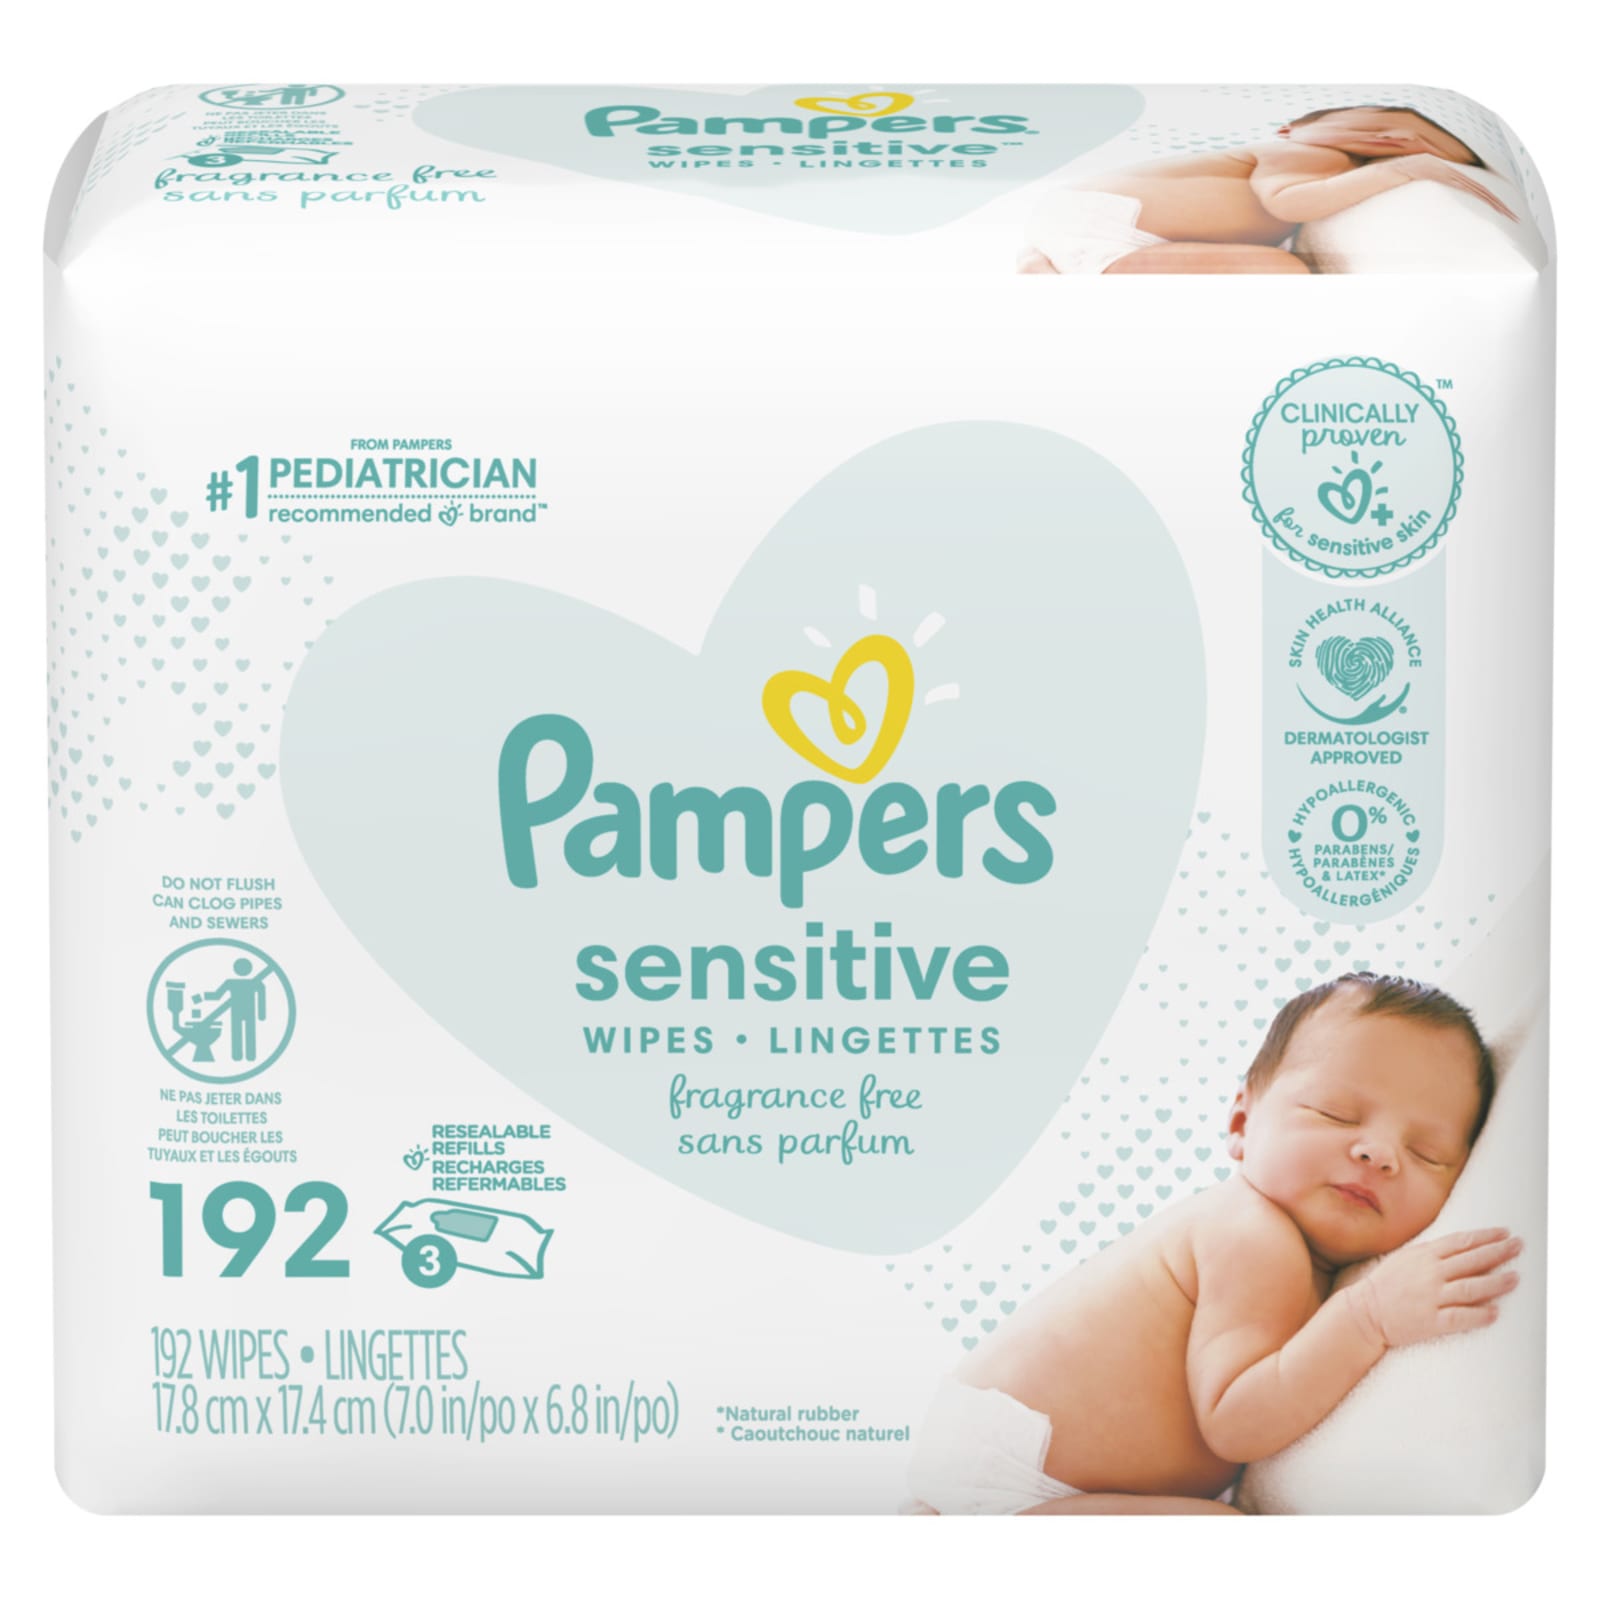 Dwang slagader Canberra Sensitive Baby Wipes - 3 Refills by Pampers at Fleet Farm